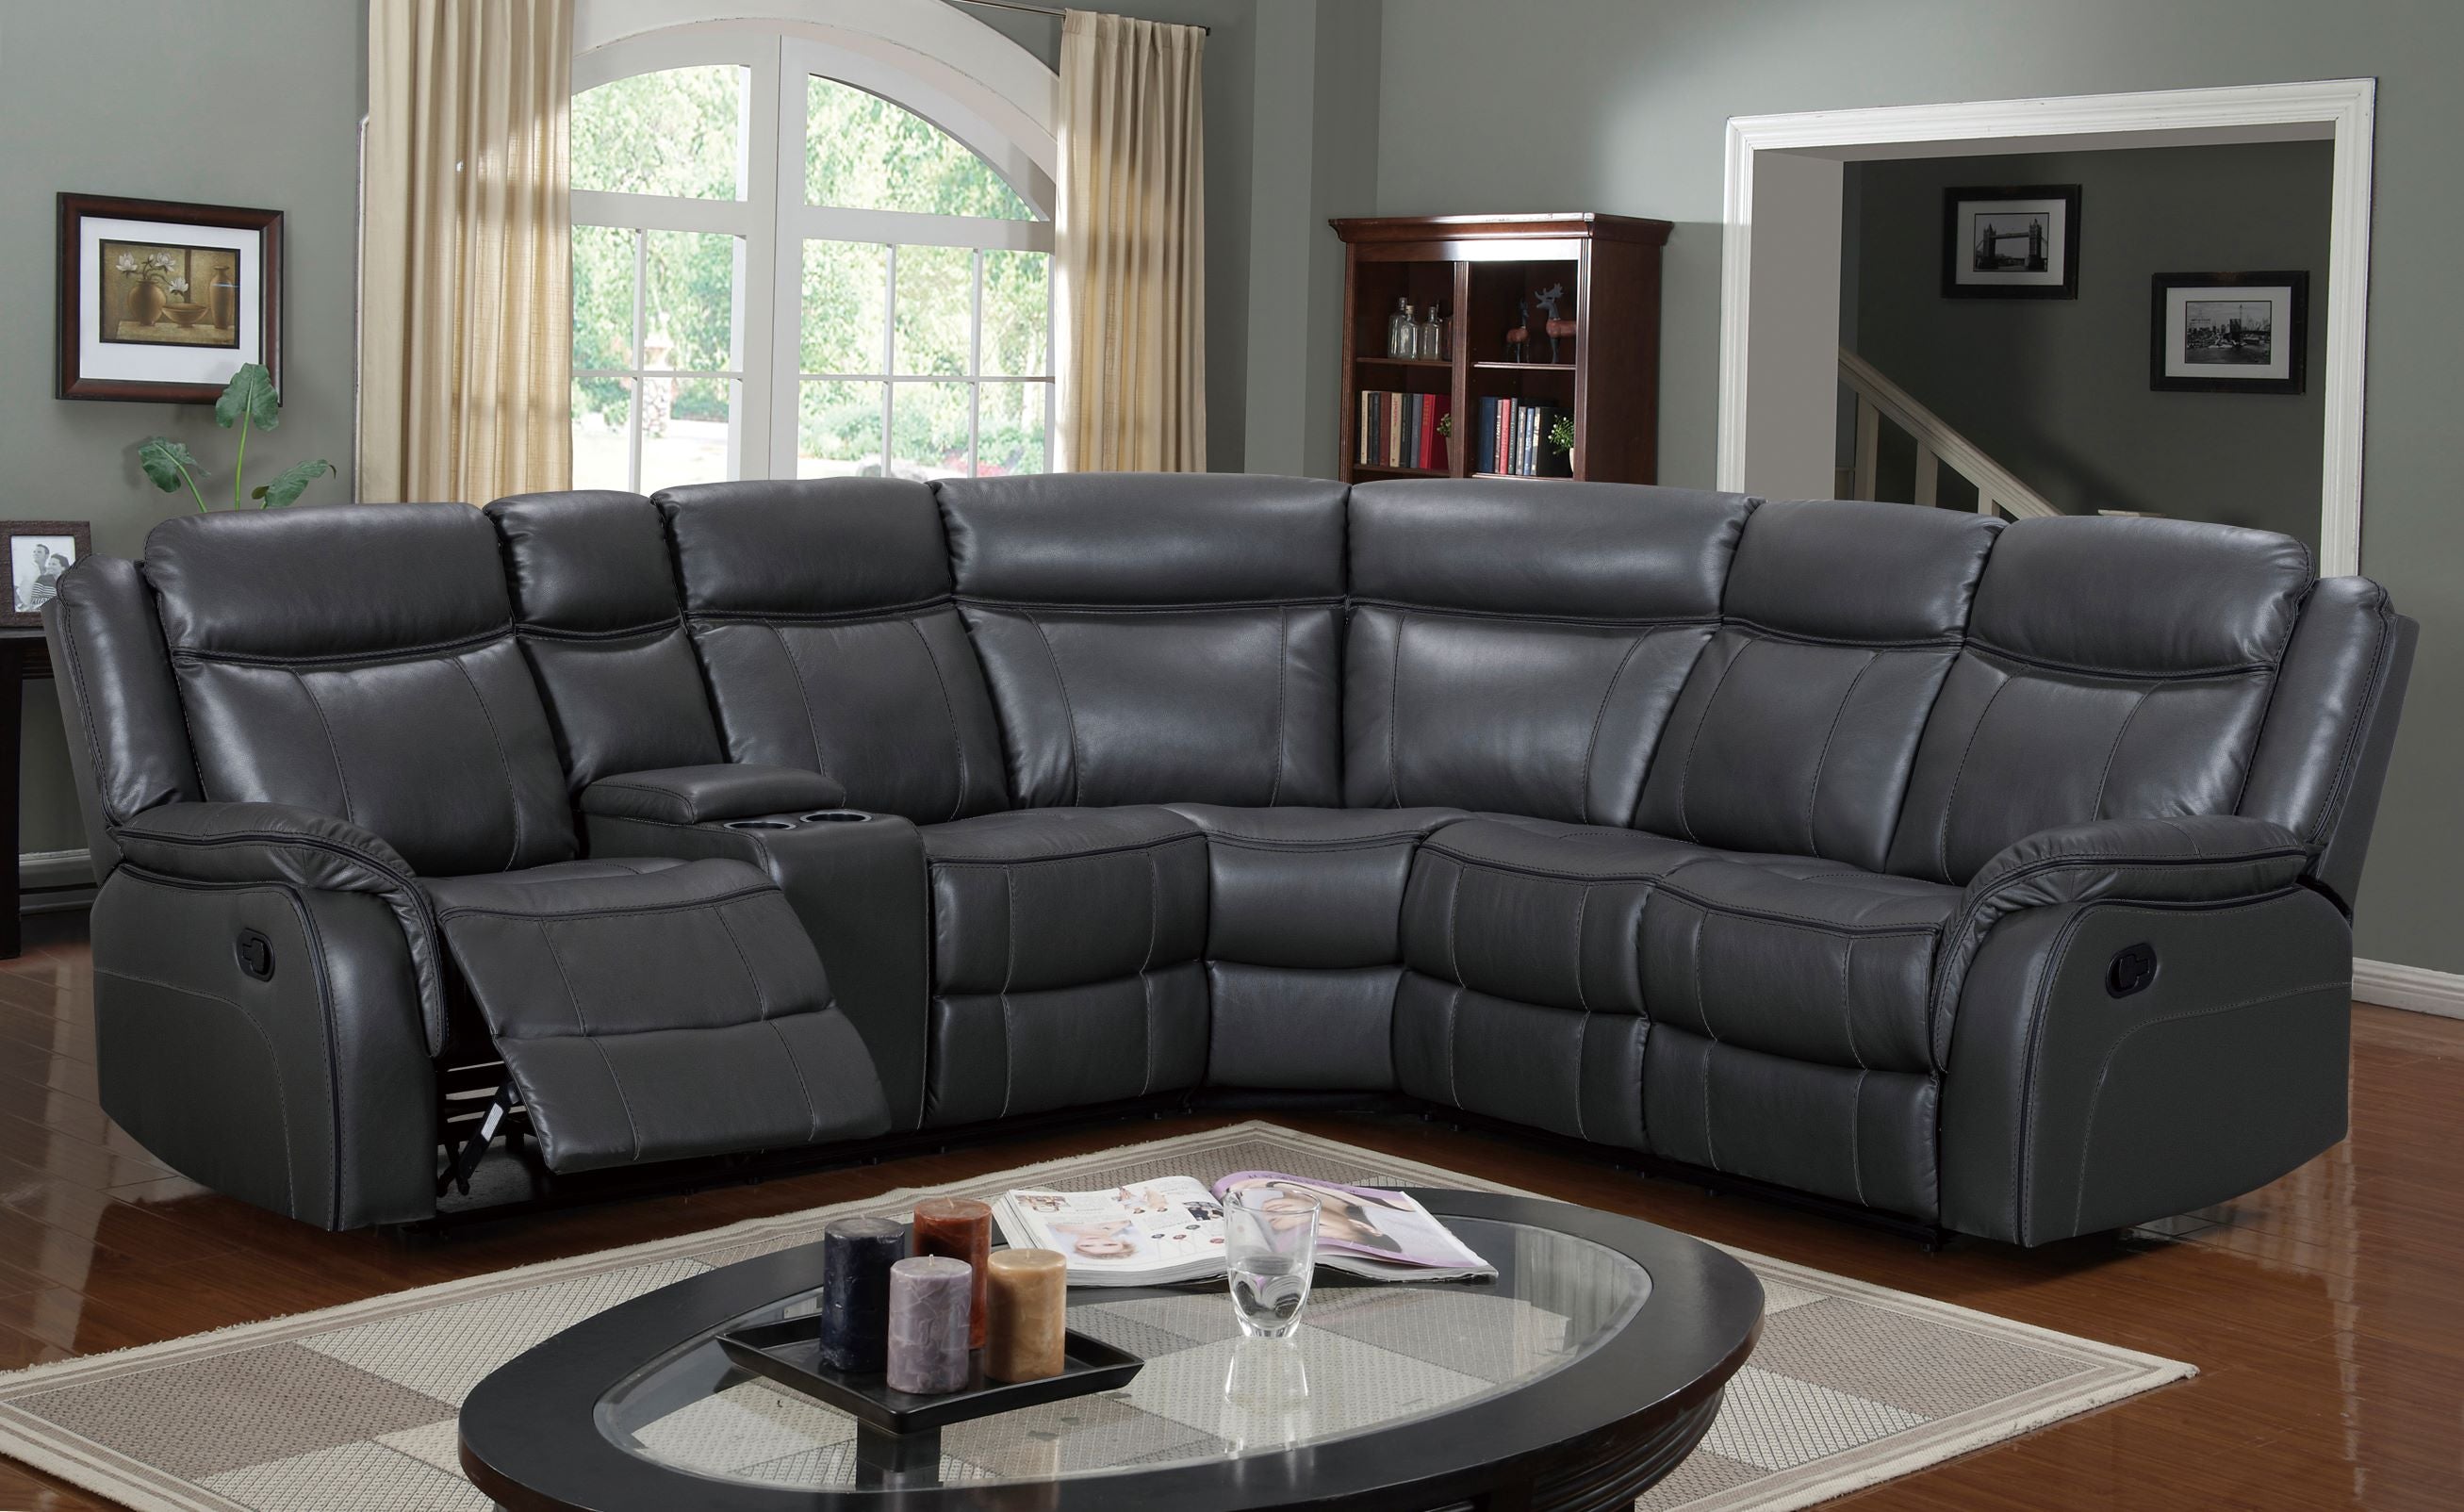 Neoma Manual Recliner Sectional Sofa Grey Gel Leather 70220